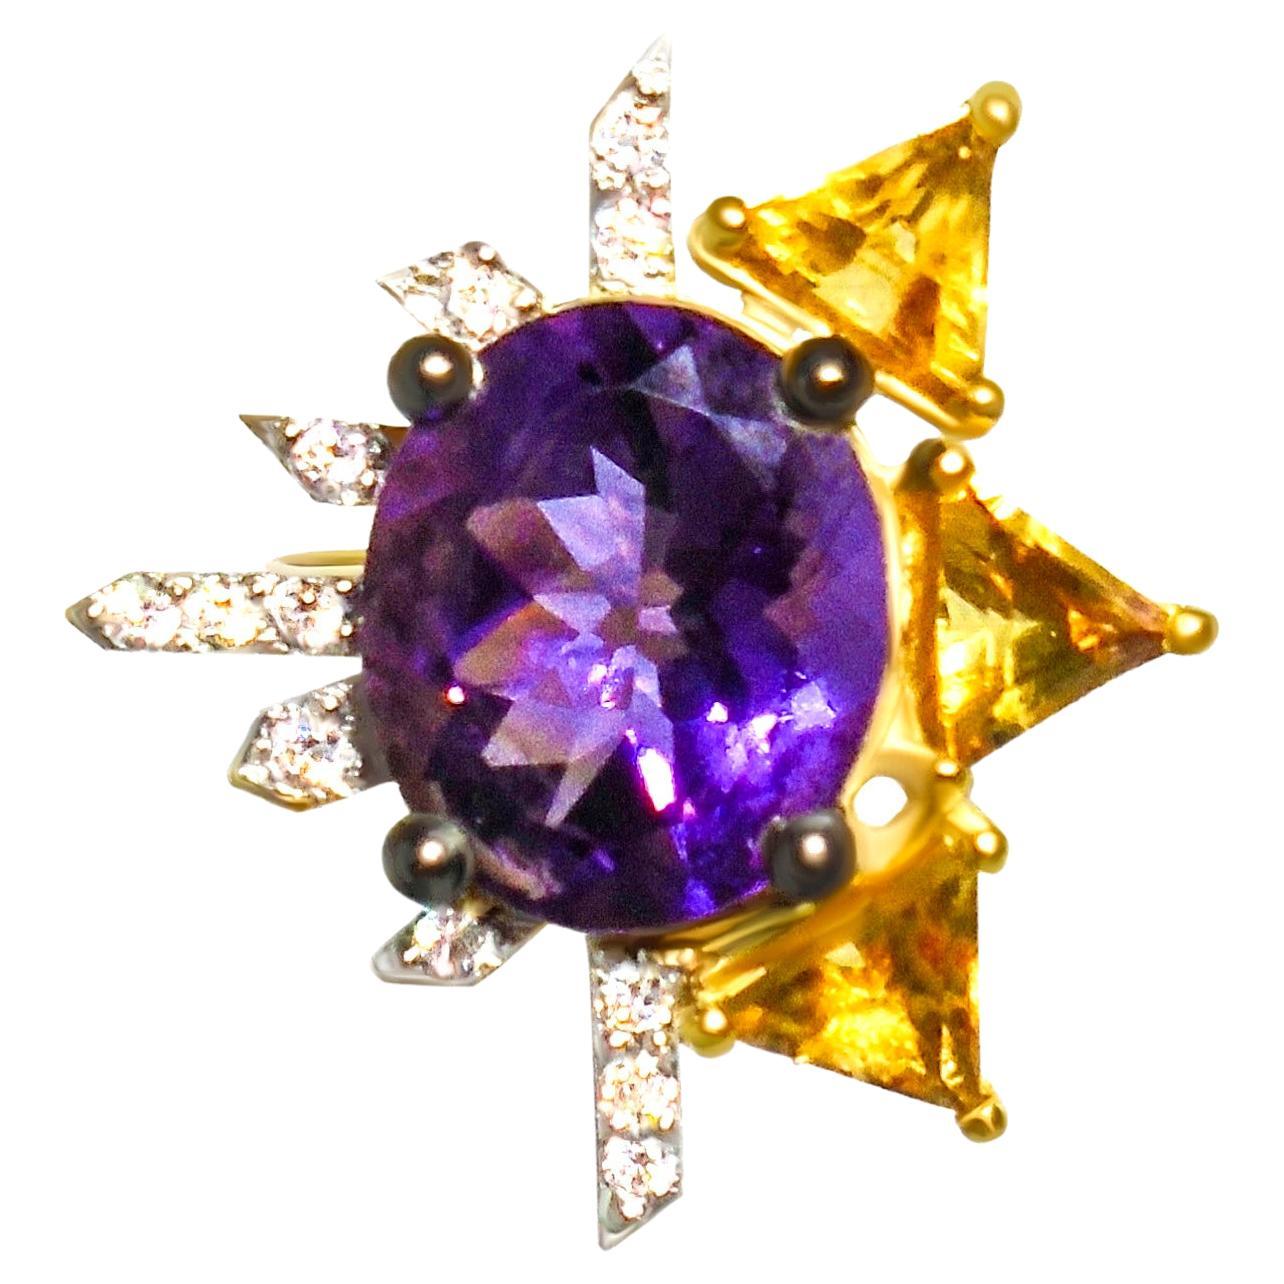 Royal Purple 14K Gold with Amethyst, Diamonds and Citrine Ring